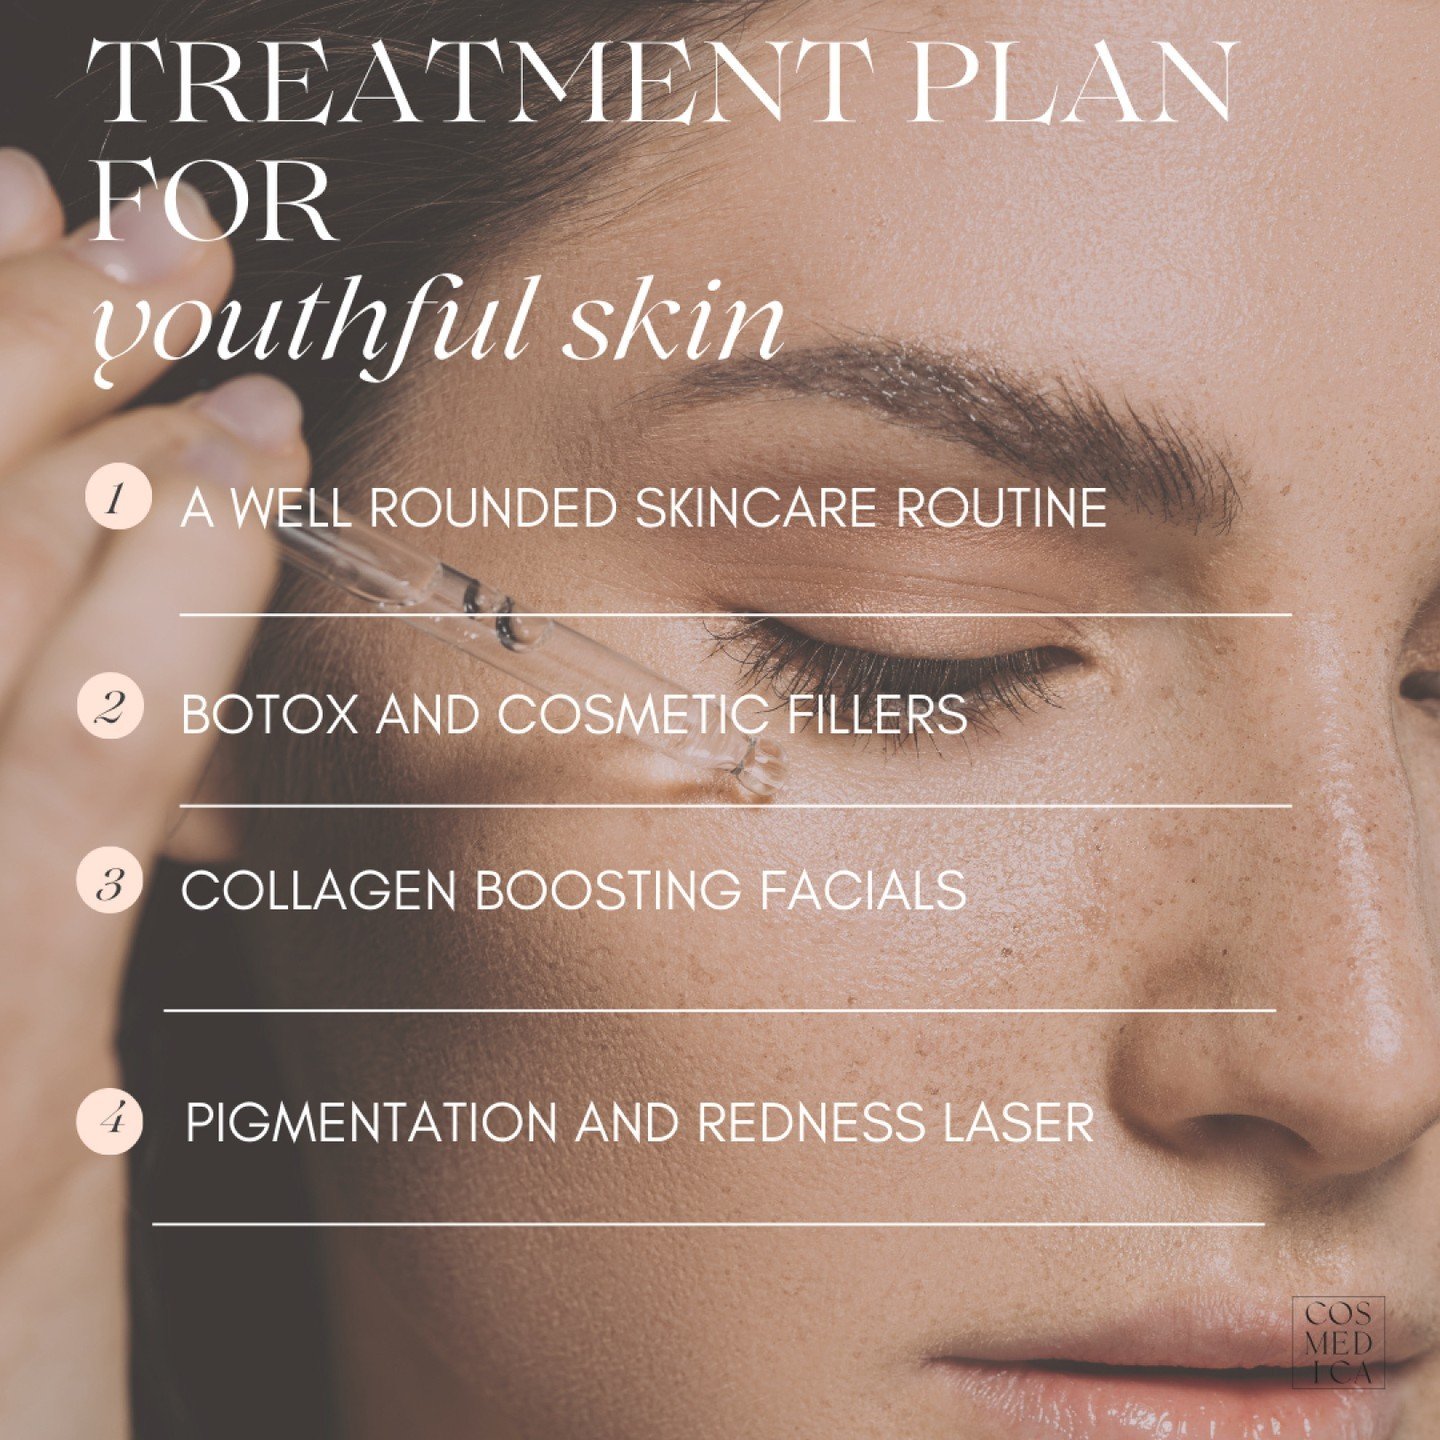 Its never too early to get started with a treatment plan ! 4 simple and easy steps is all it takes. 

Step 1: 
A well rounded skincare routine is needed for all. 

Step 2: 
Botox and Filler is the best treatment to get started with. Neurotoxin to sof